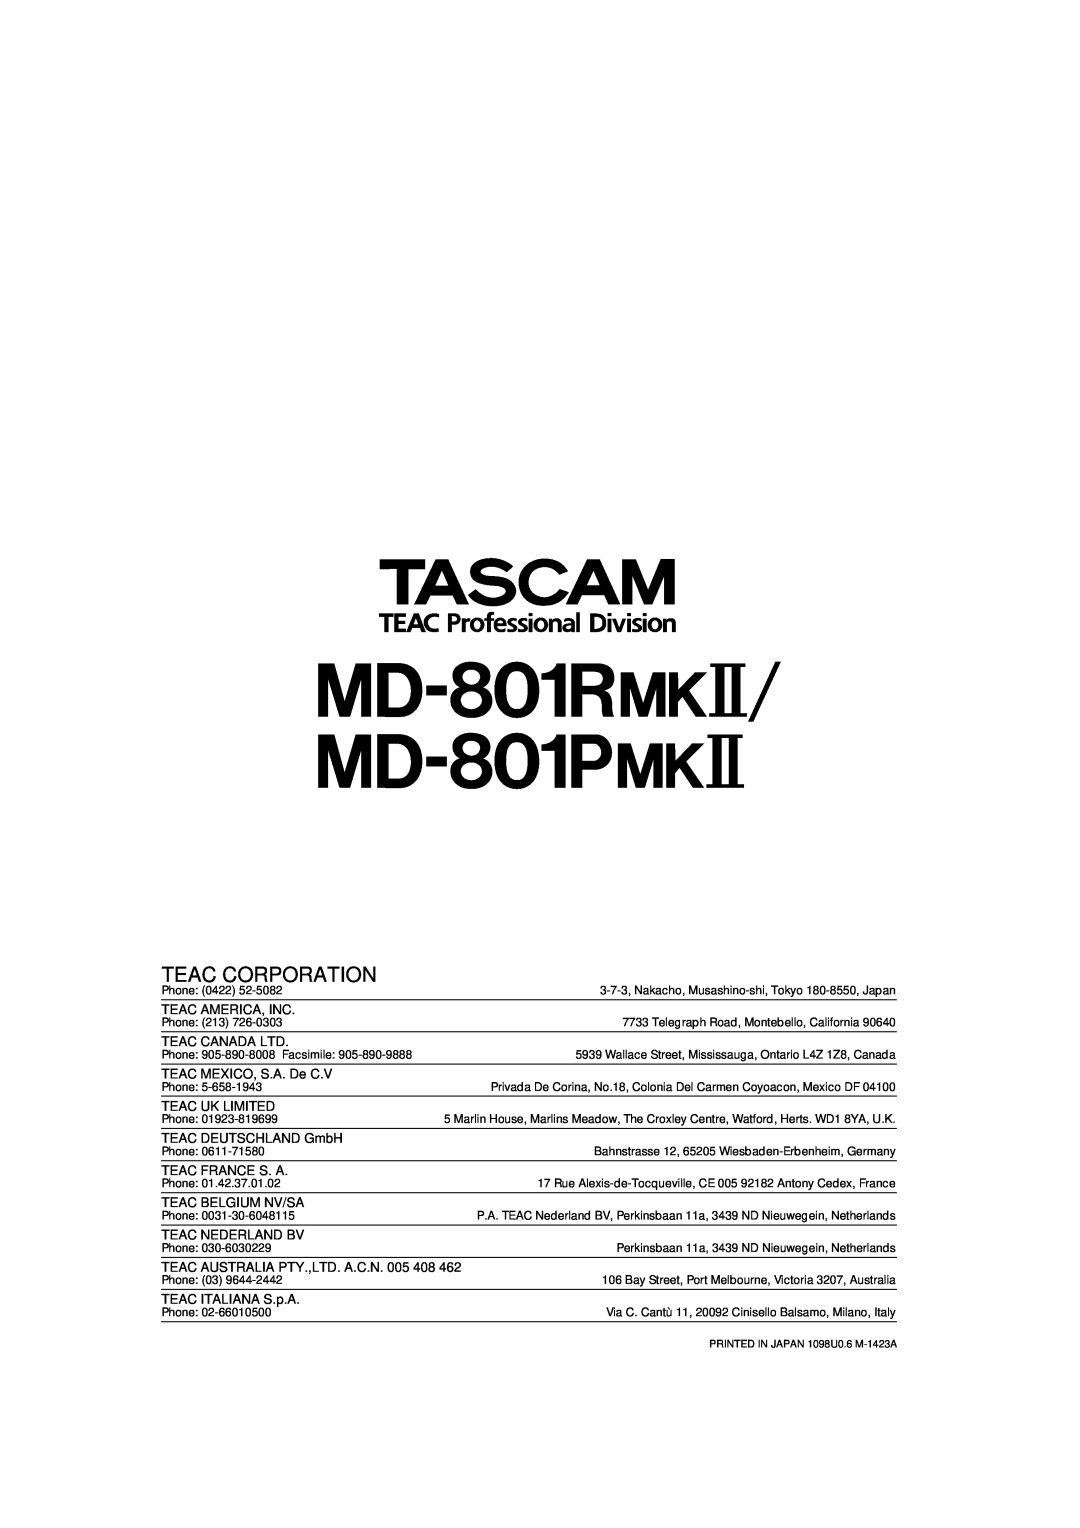 Tascam MD-801RMKII owner manual MD-801R@# MD-801P@#, Teac Corporation 